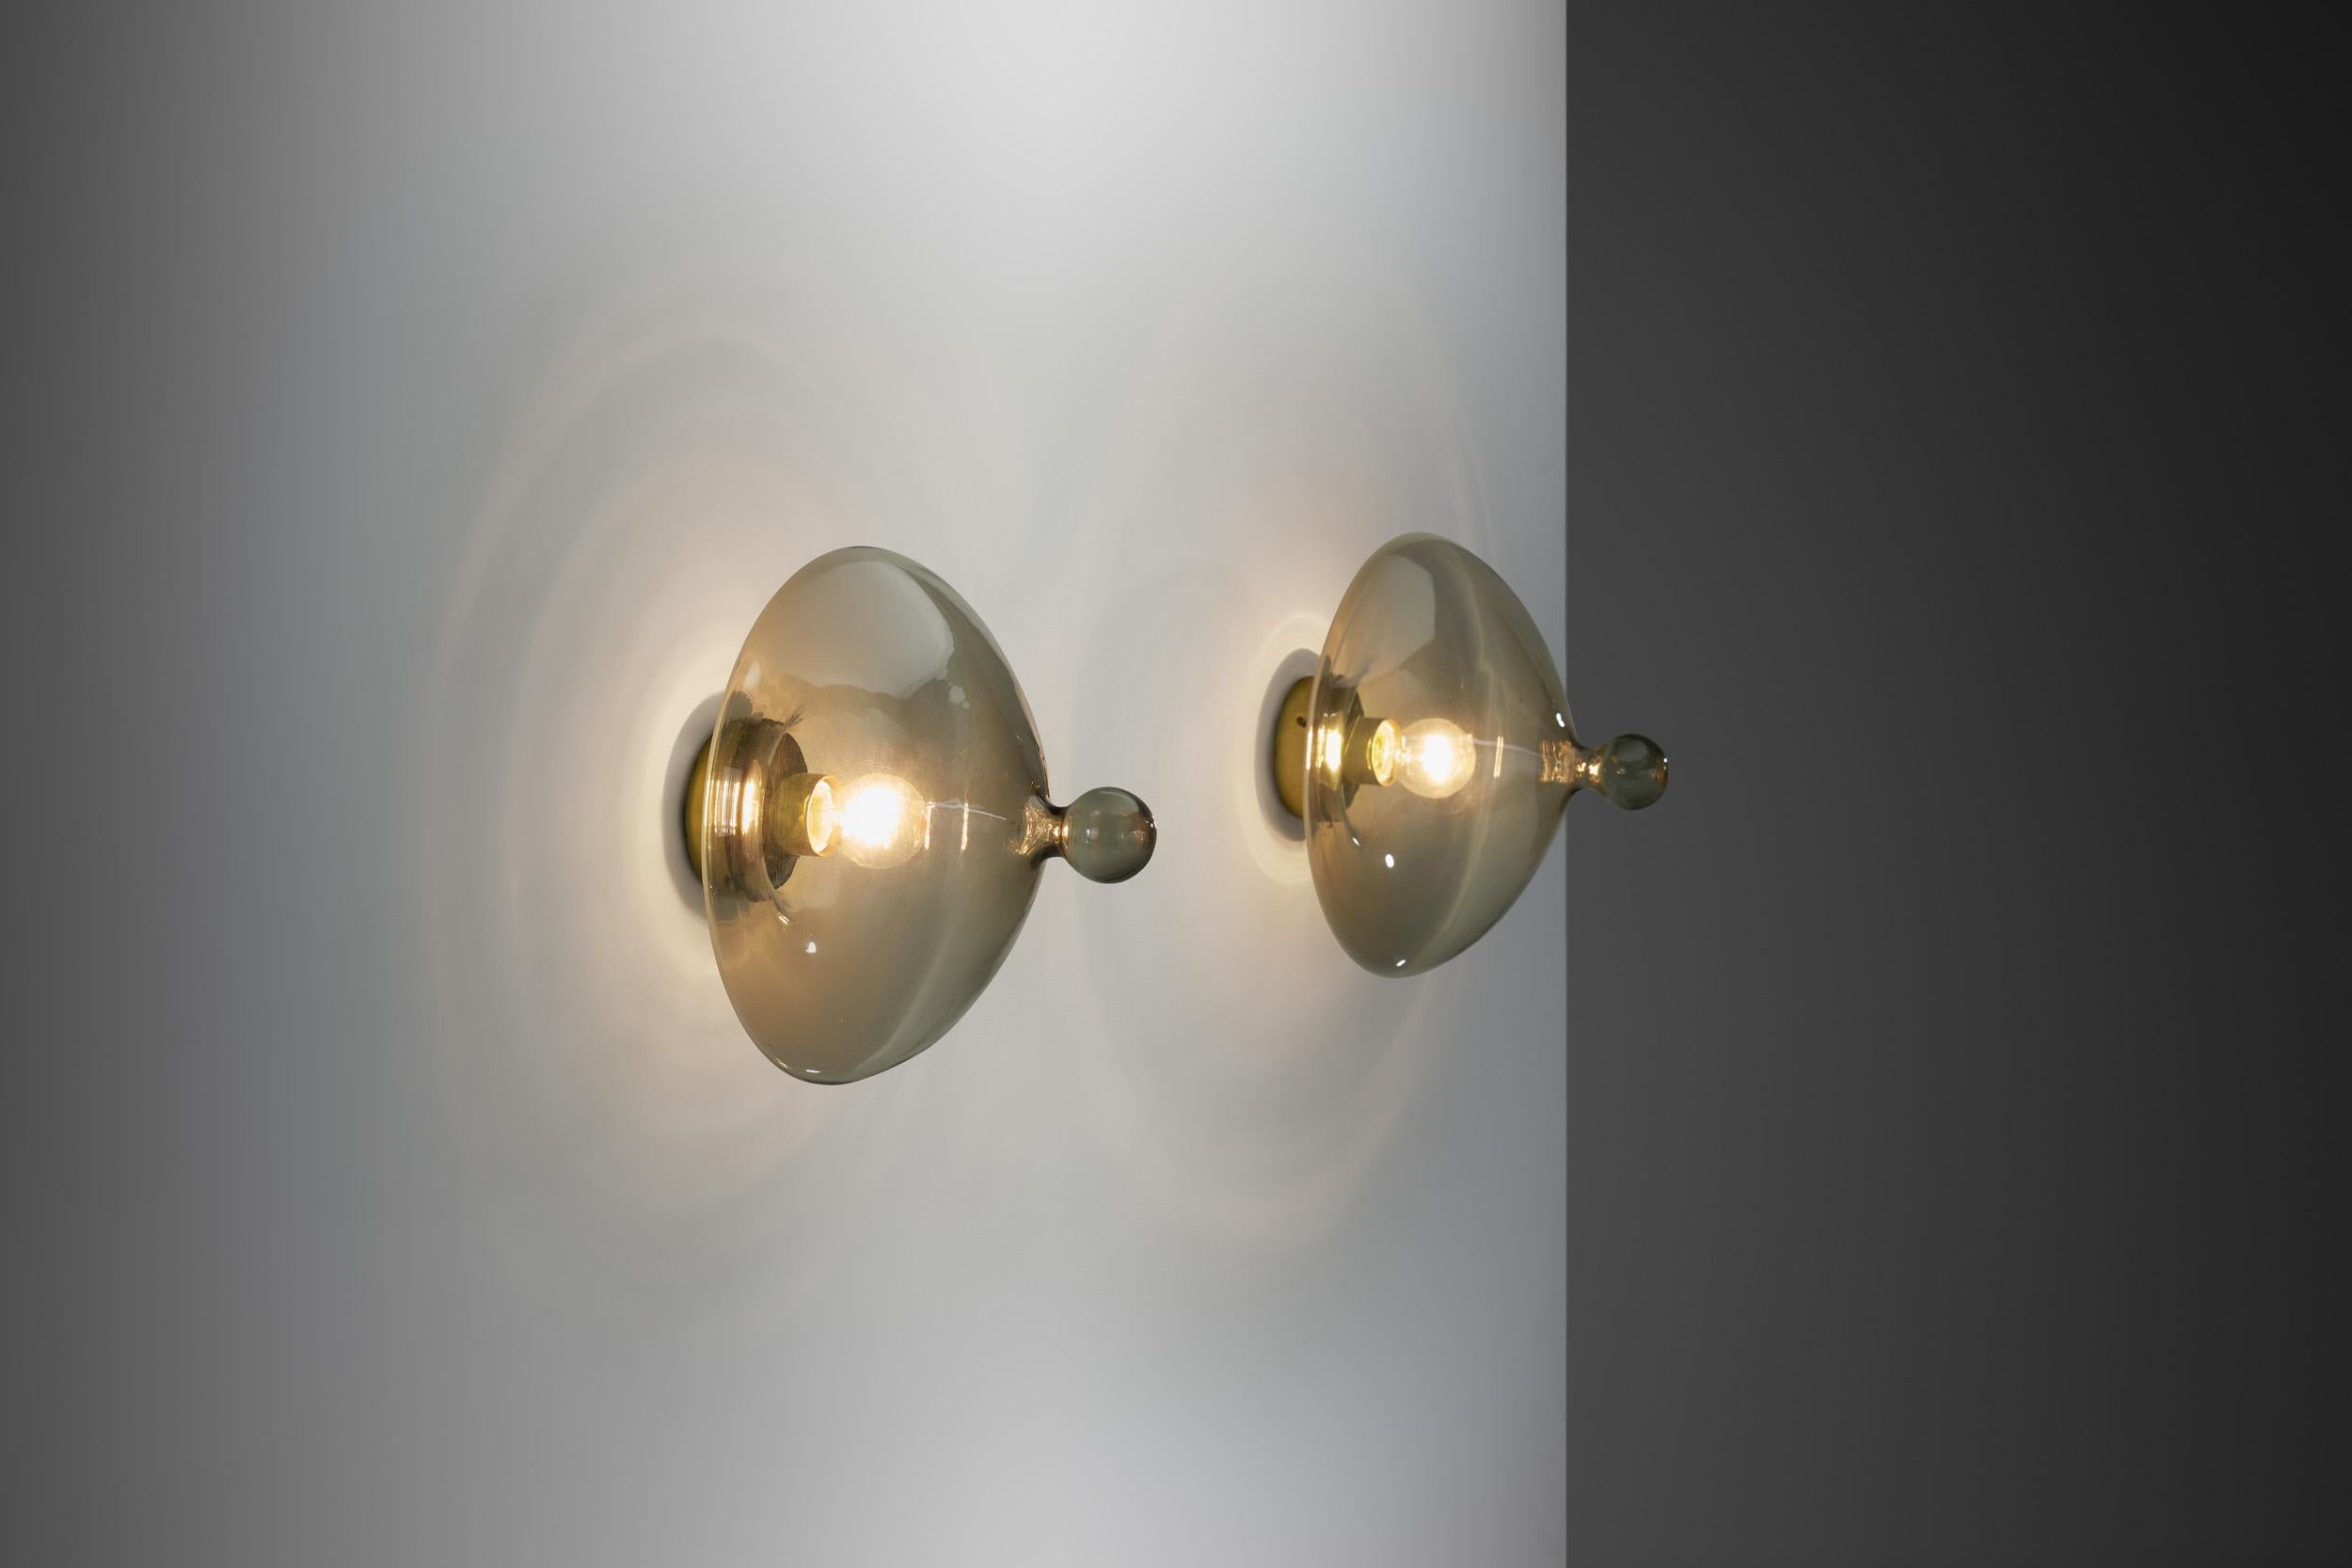 This lovely pair of Dutch ceiling or wall lamps are Raak’s model B-1052, better known as the “Chaparral”. Made of high quality glass with brass details, this model is a unique design that both figuratively and literally stands out wherever it is